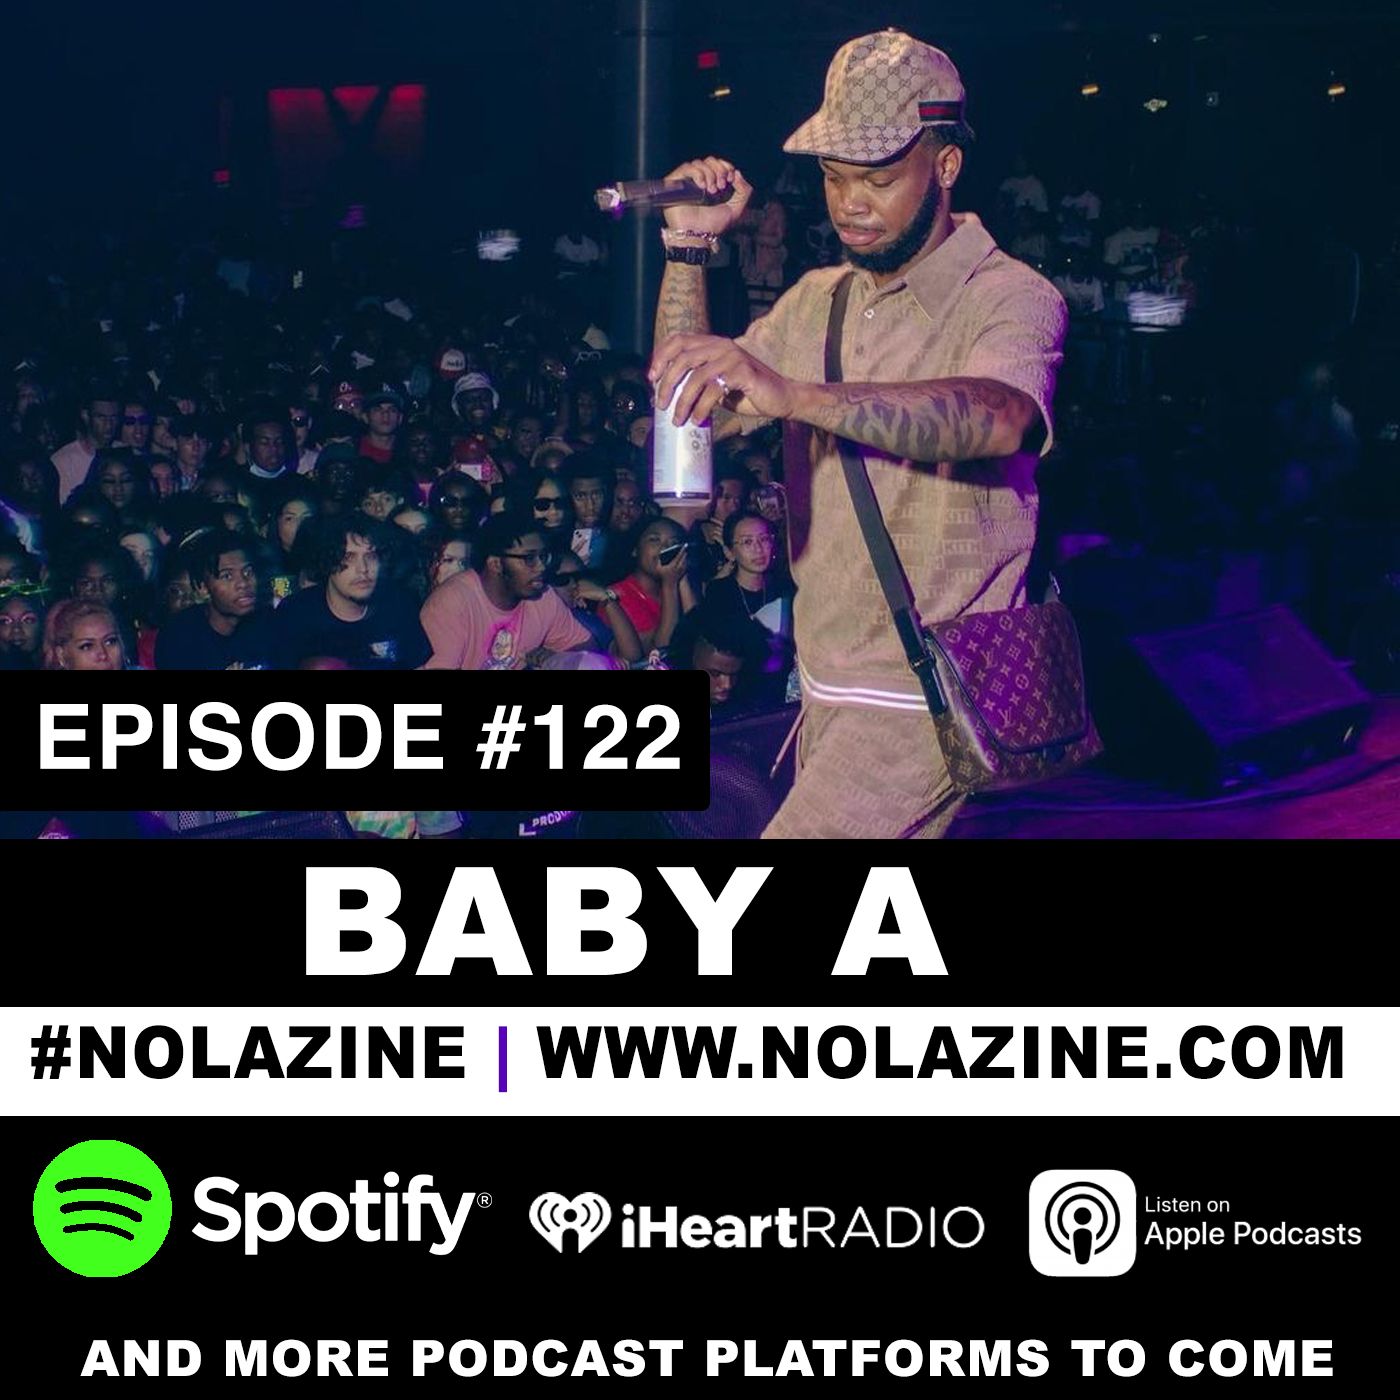 EP: 122 Featuring Baby A